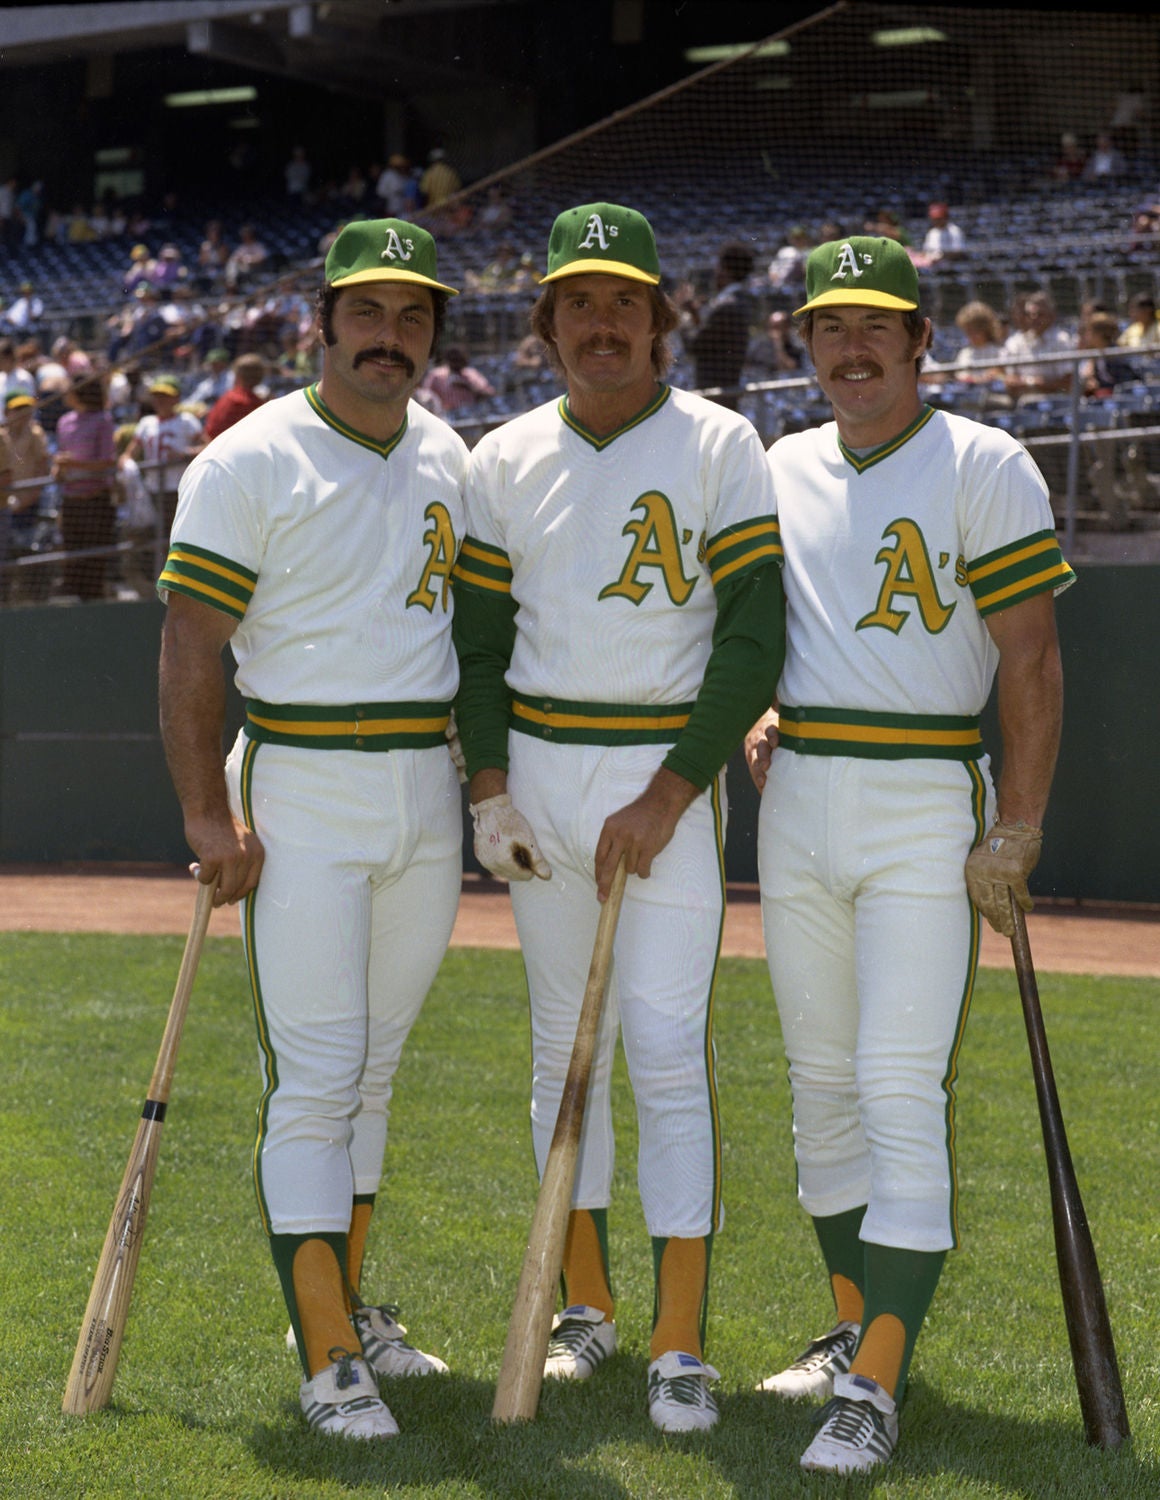 A’s celebrate 50 historic years in Oakland Baseball Hall of Fame